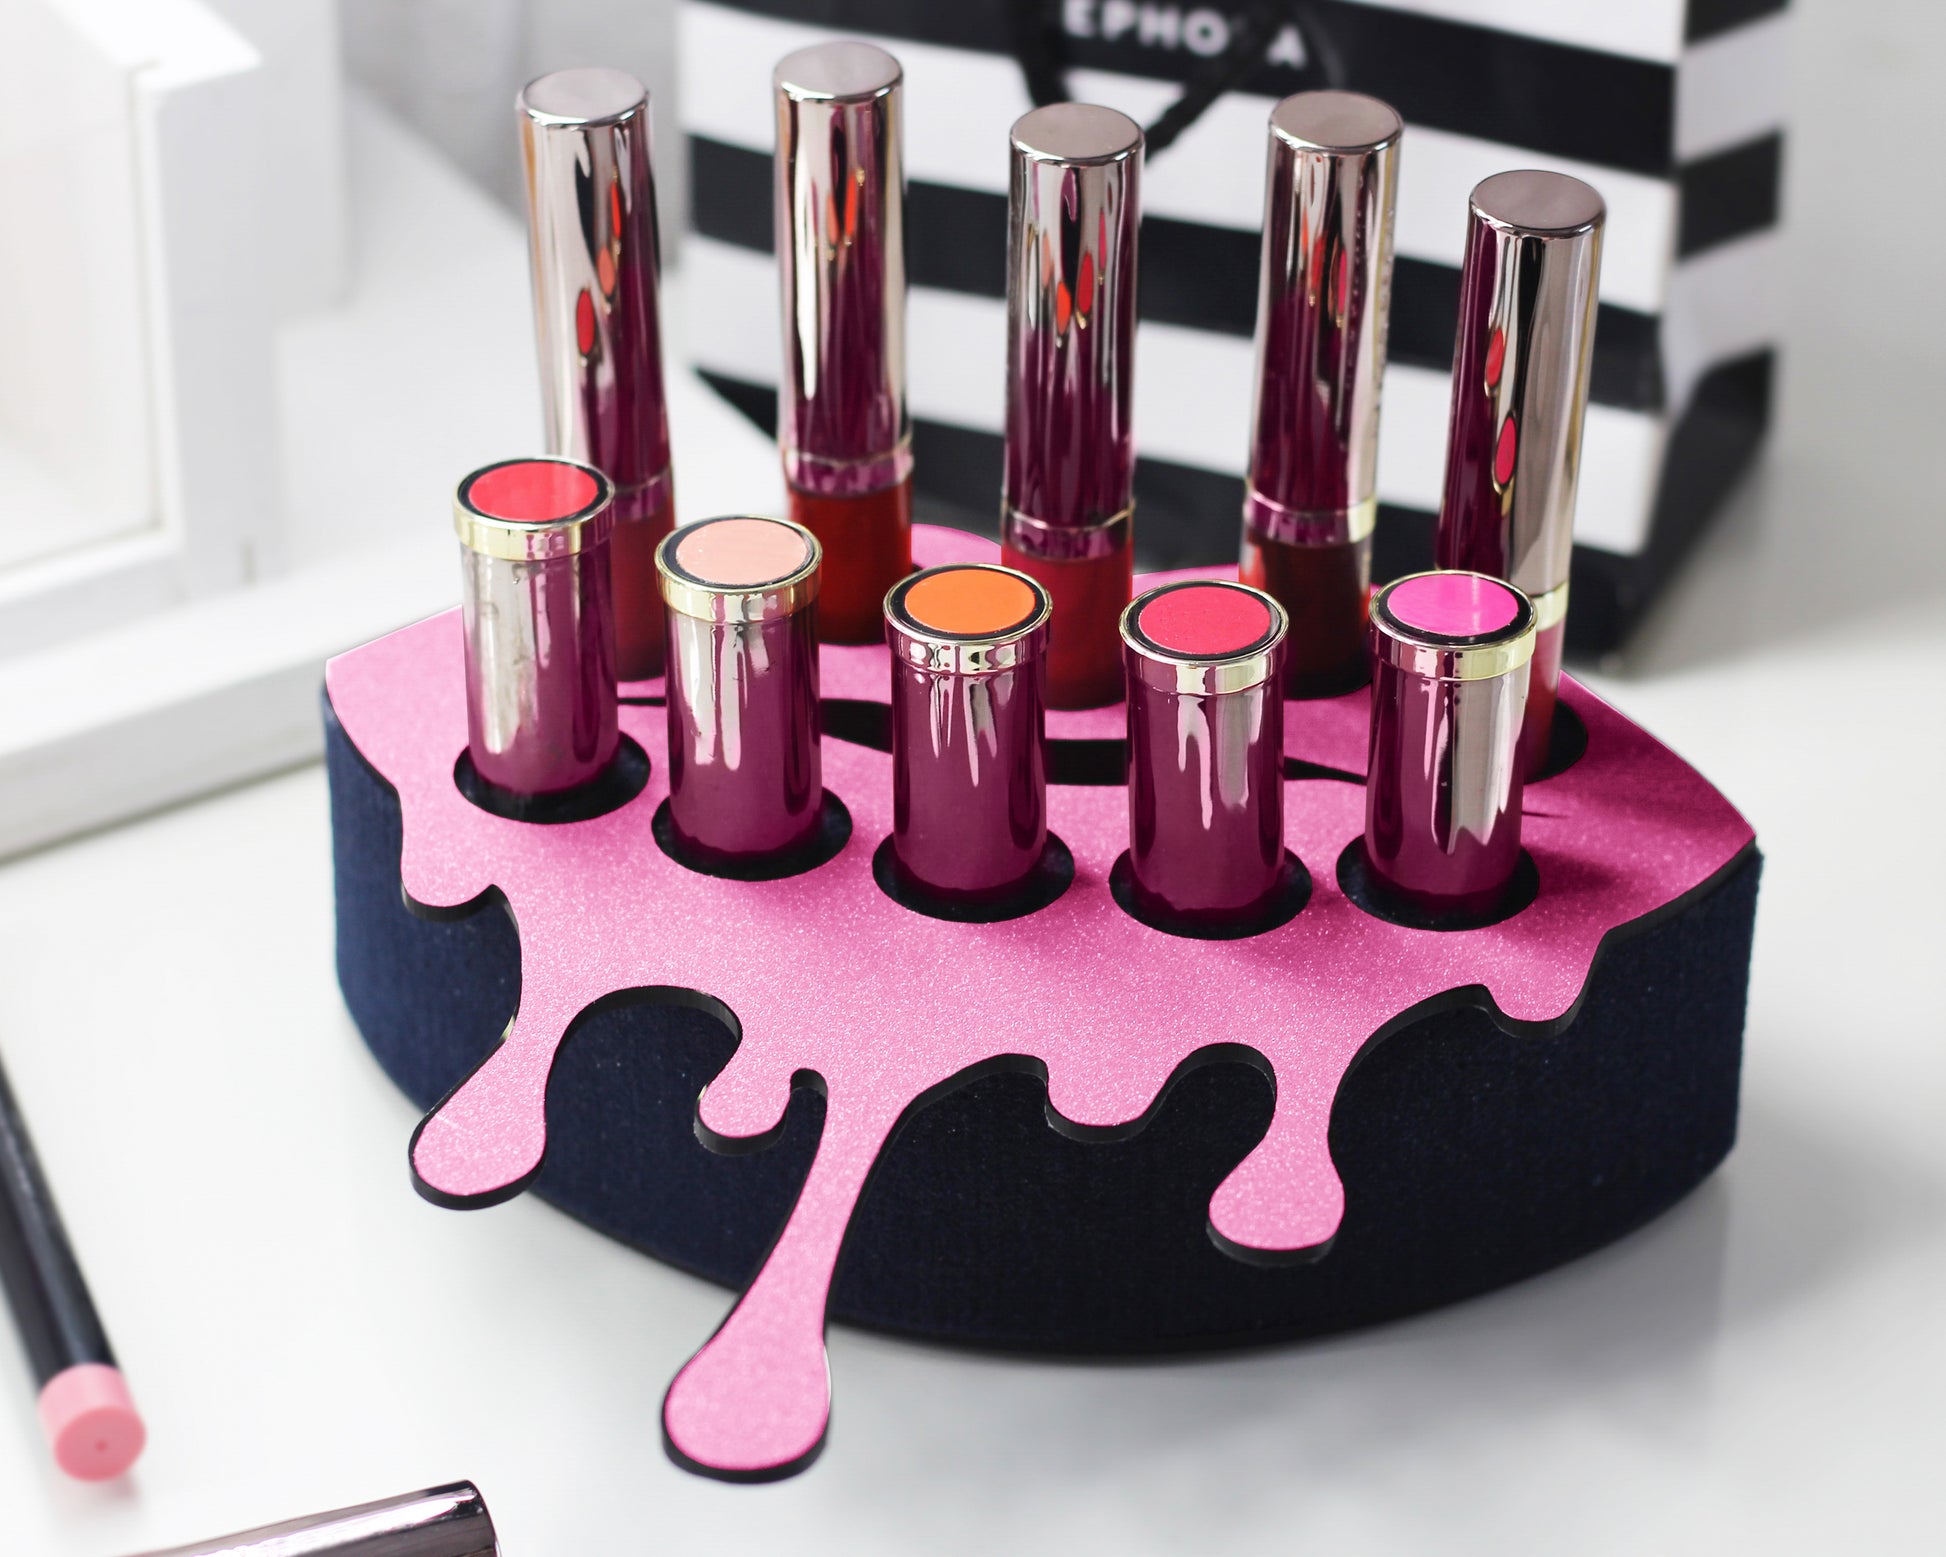 Small Lip Design Lipstick Organizer holding 10 lipsticks mounted on the wall with lipstick easily accessible and organized. Hanging Lipstick Holder that looks like wall art. Shown sitting on a makeup vanity.